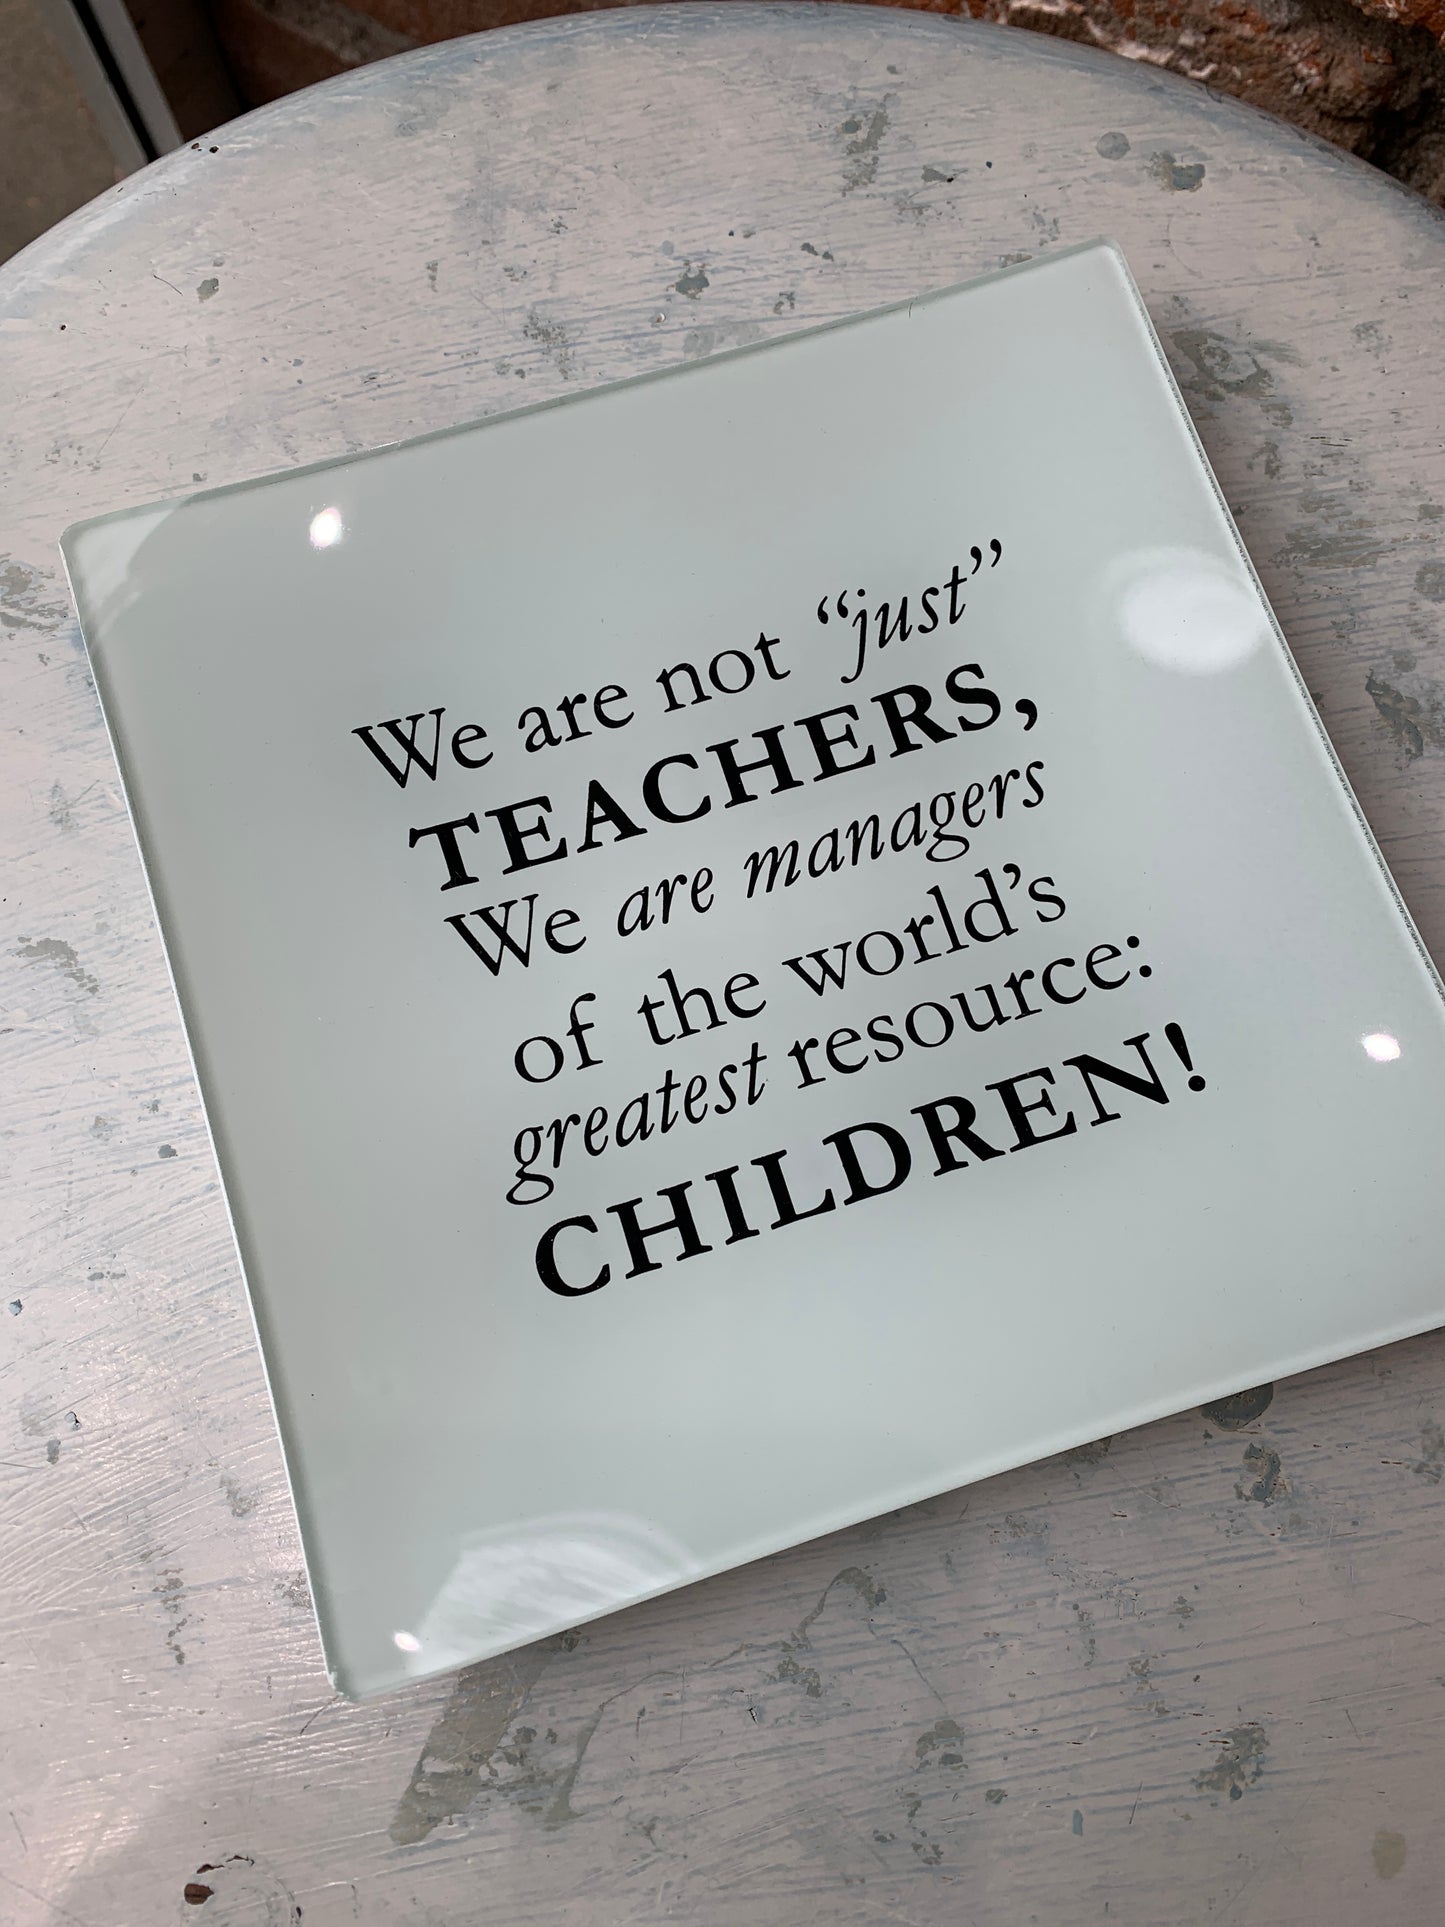 Tell a teacher how much you appreciate their dedication and hard work with this decorative plate that celebrates one of our noblest professions. The thoughtful quote embellishing this 6-inch-square plate reminds them of their meaningful impact. Perfect for holding jewelry, coins or other small trinkets or to display on a desk. Makes a great end-of-the-year gift for your child's teacher or treat a teacher-friend with this tribute. On plate: We are not "just" teachers, we are managers of the world's greatest 